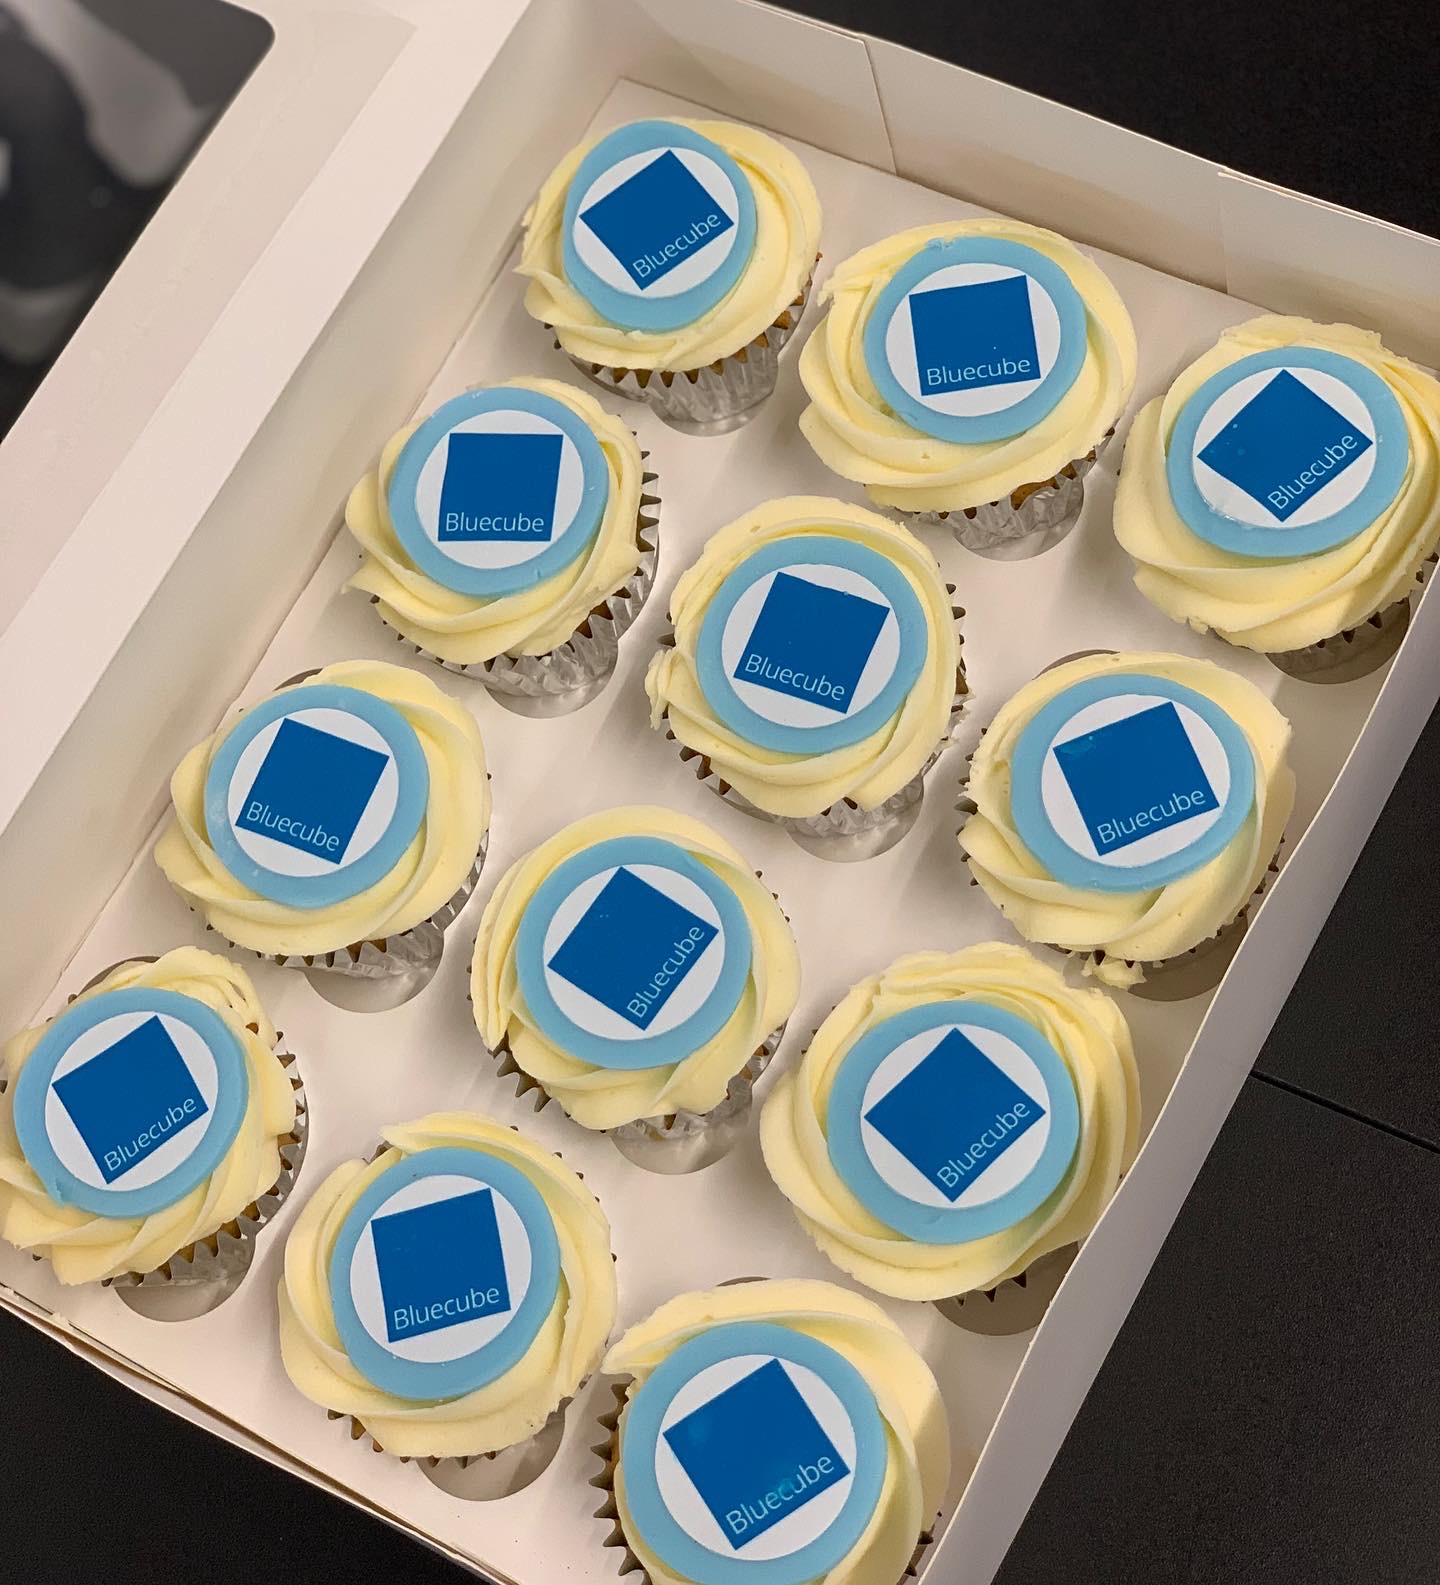 cupcakes with the old bluecube logo on